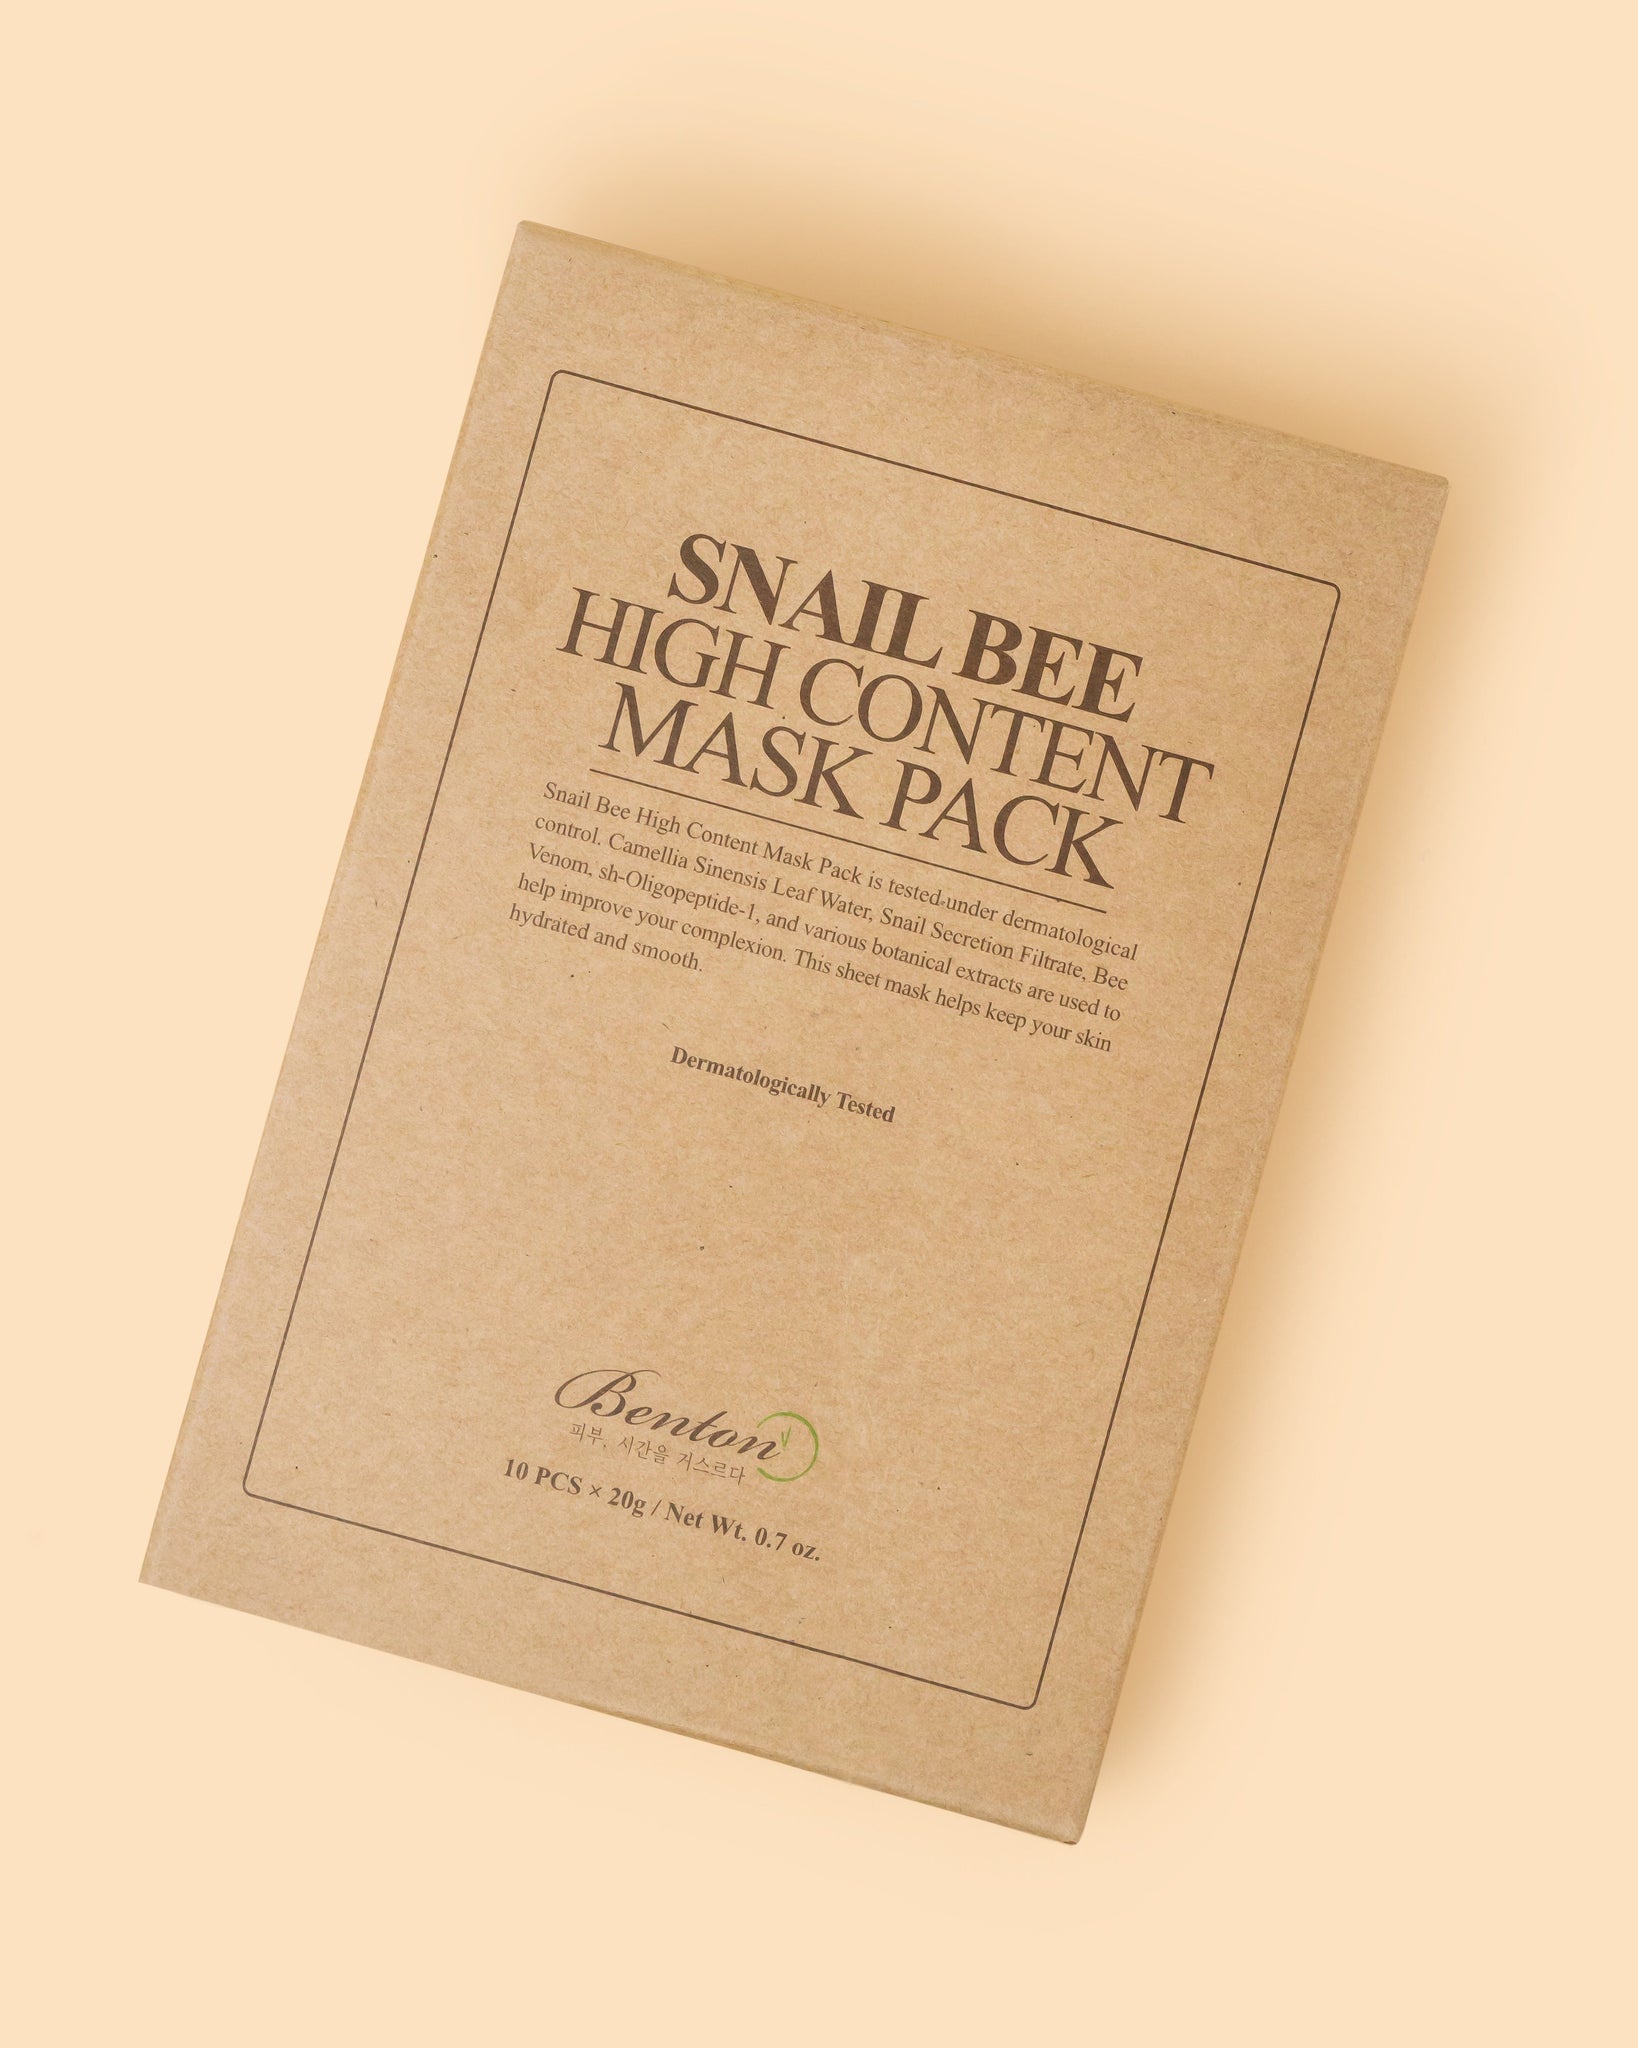 Snail Bee High Content Mask Pack (Box of 10) Product Picture